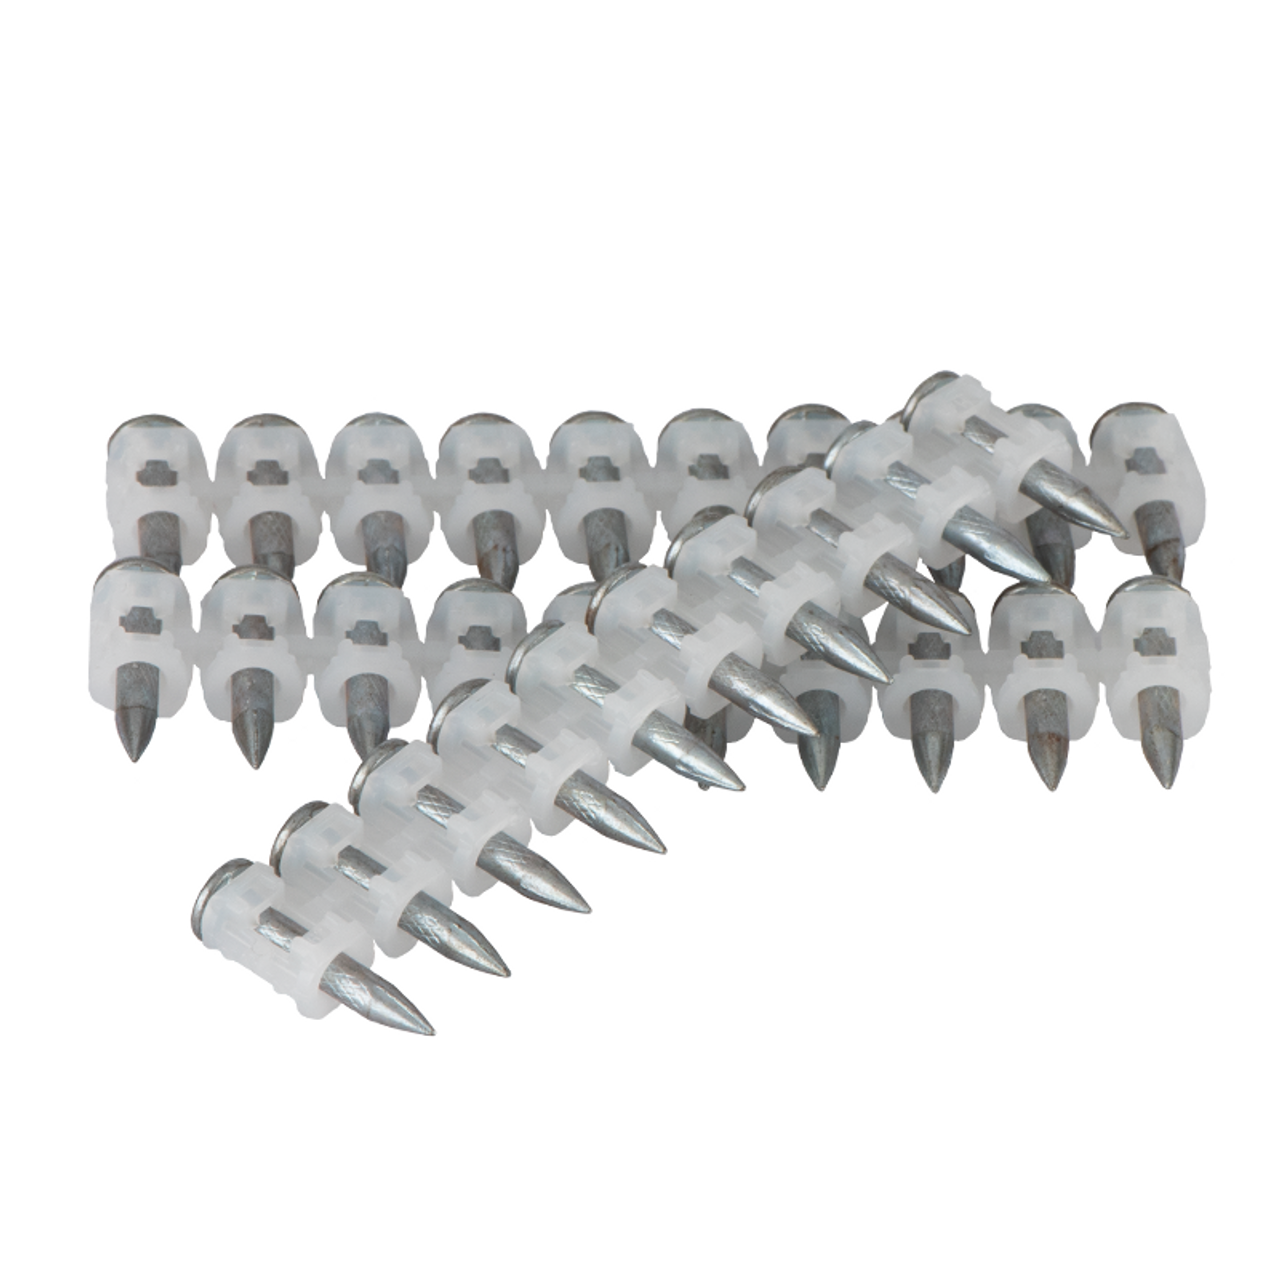 1 pack(0.5kg) of 1 inch Hardened Steel Concrete Nails for Wall,Bricks,Wood